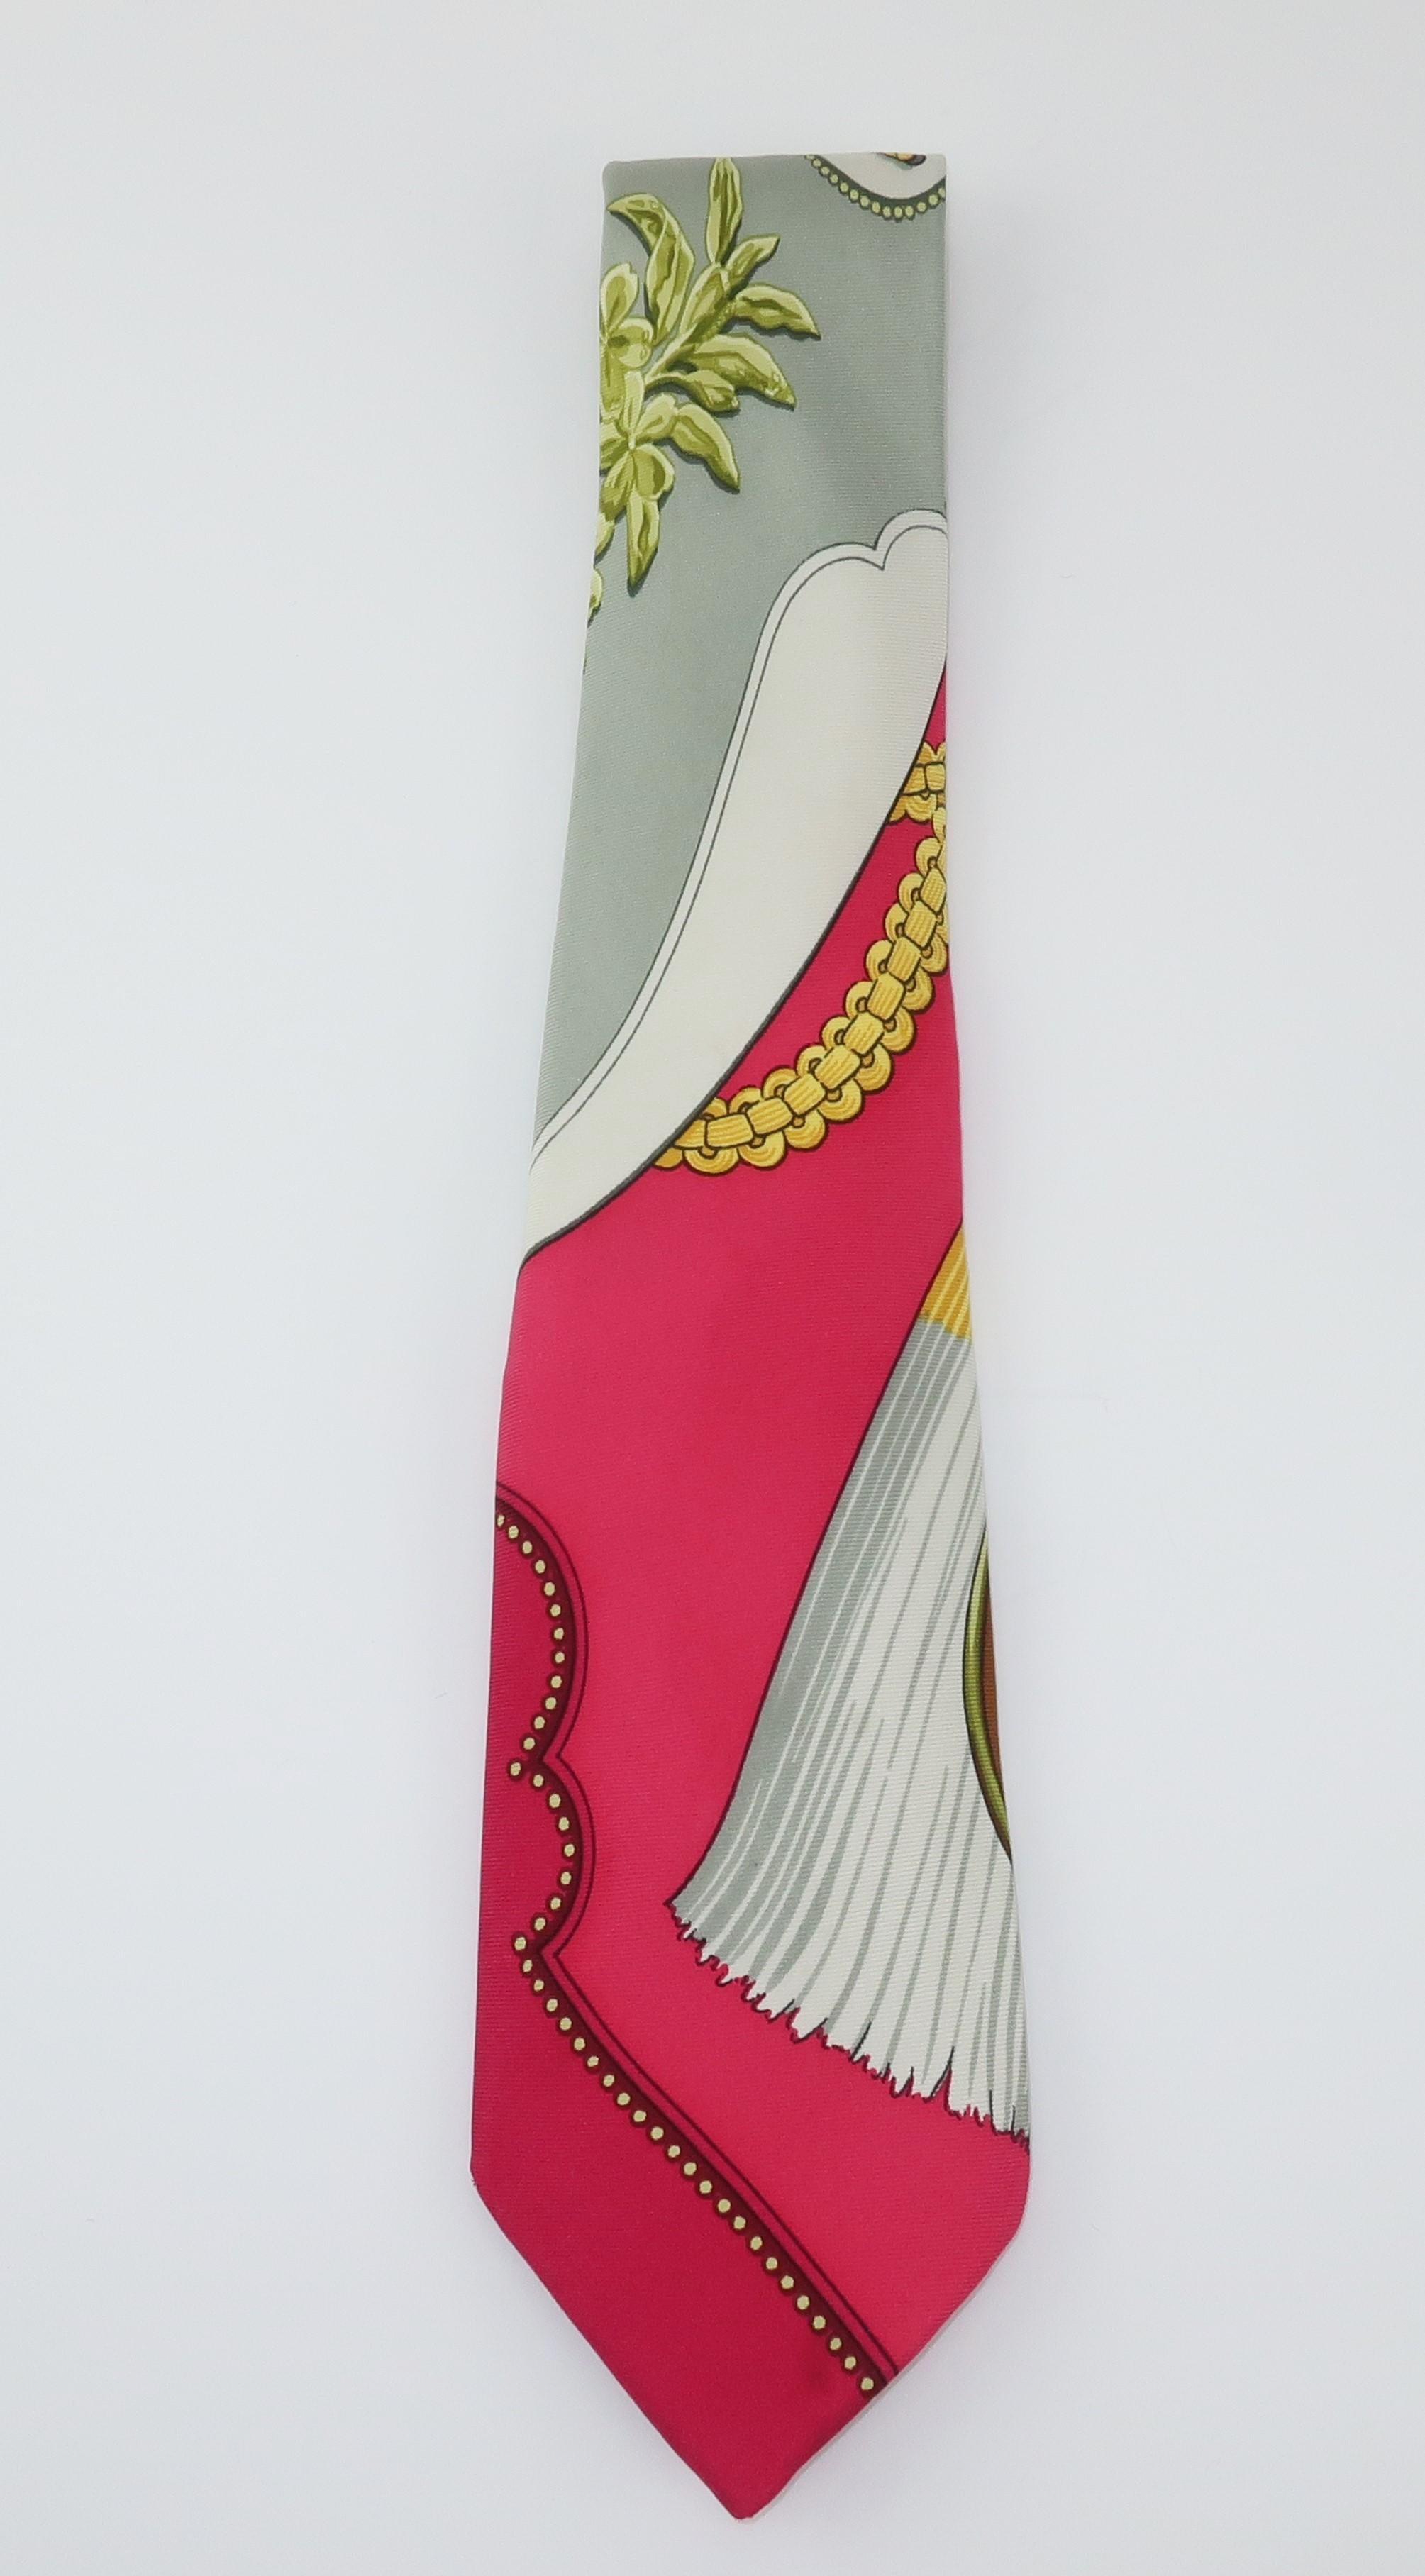 A vintage Hermes menswear French silk necktie with a trompe l'oeil design featuring tassels, chains and medallions along with a little flora and fauna all in shades of raspberry red, light gray, pearly white, golden yellow and greens. It is